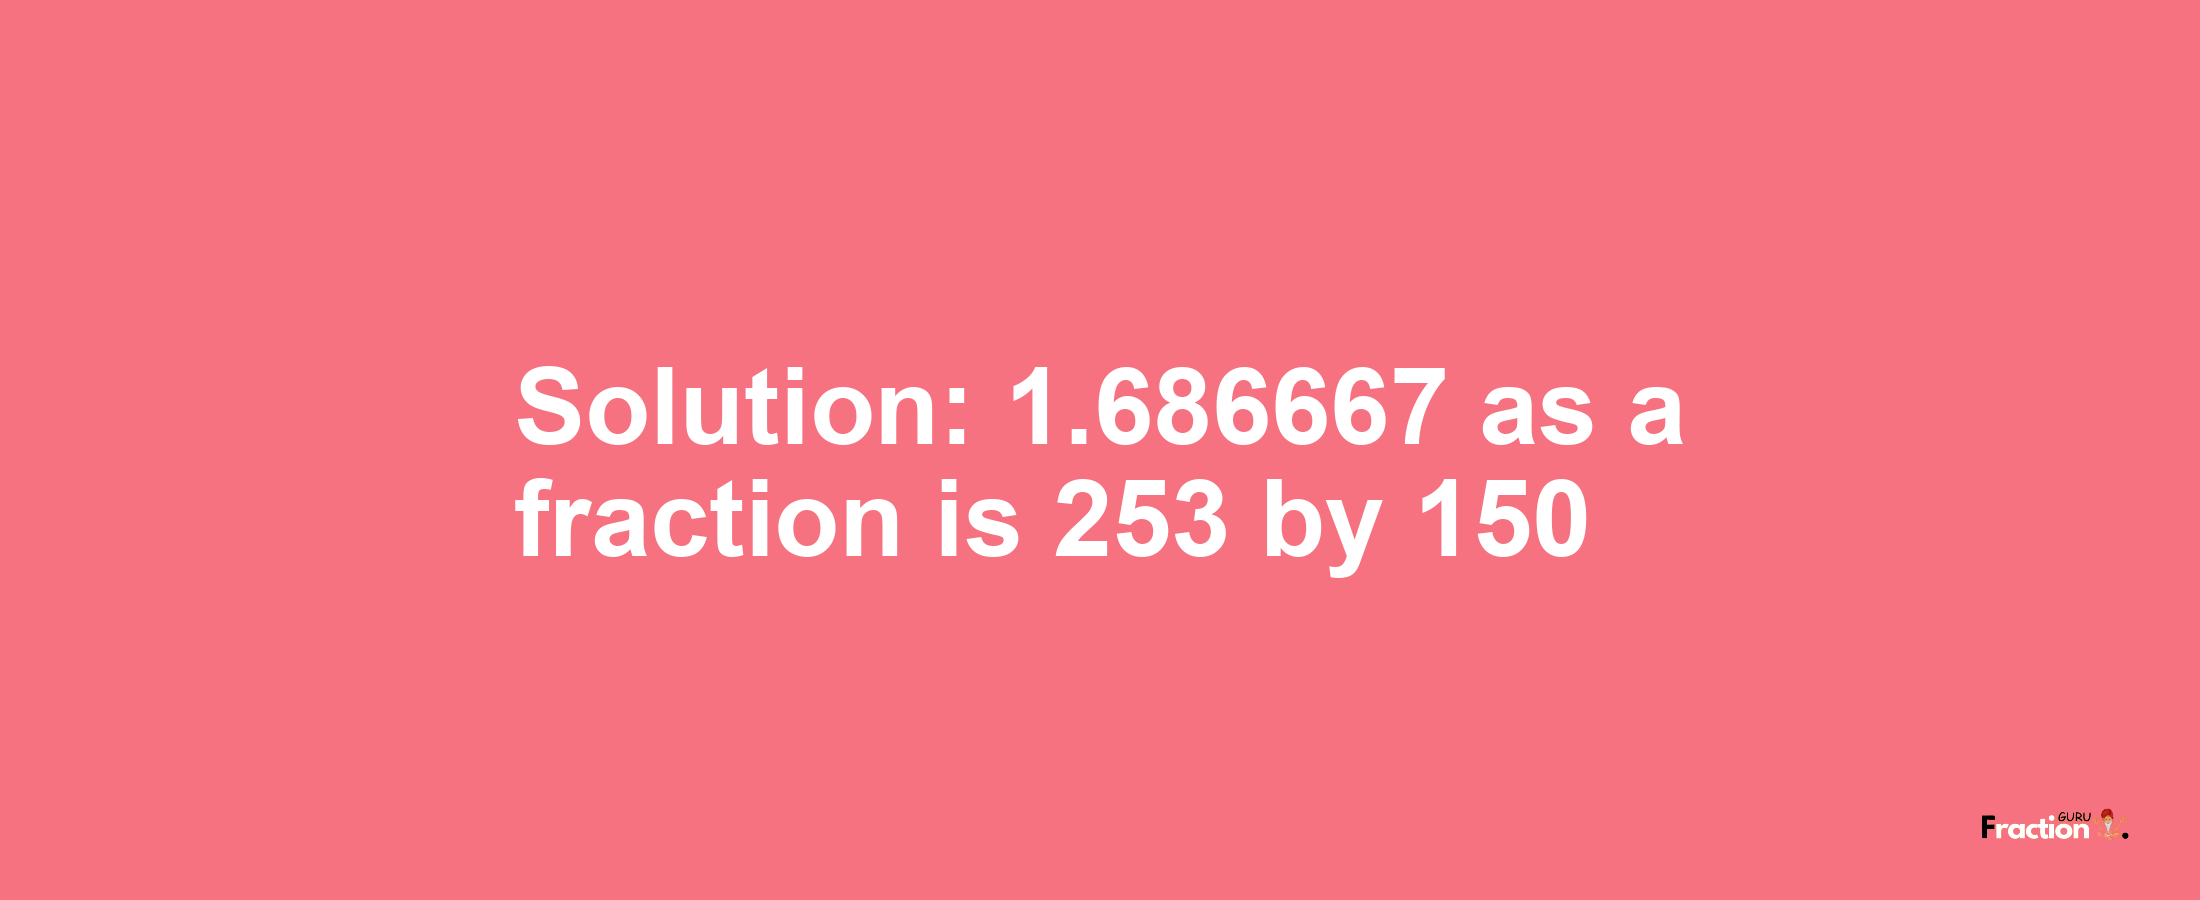 Solution:1.686667 as a fraction is 253/150